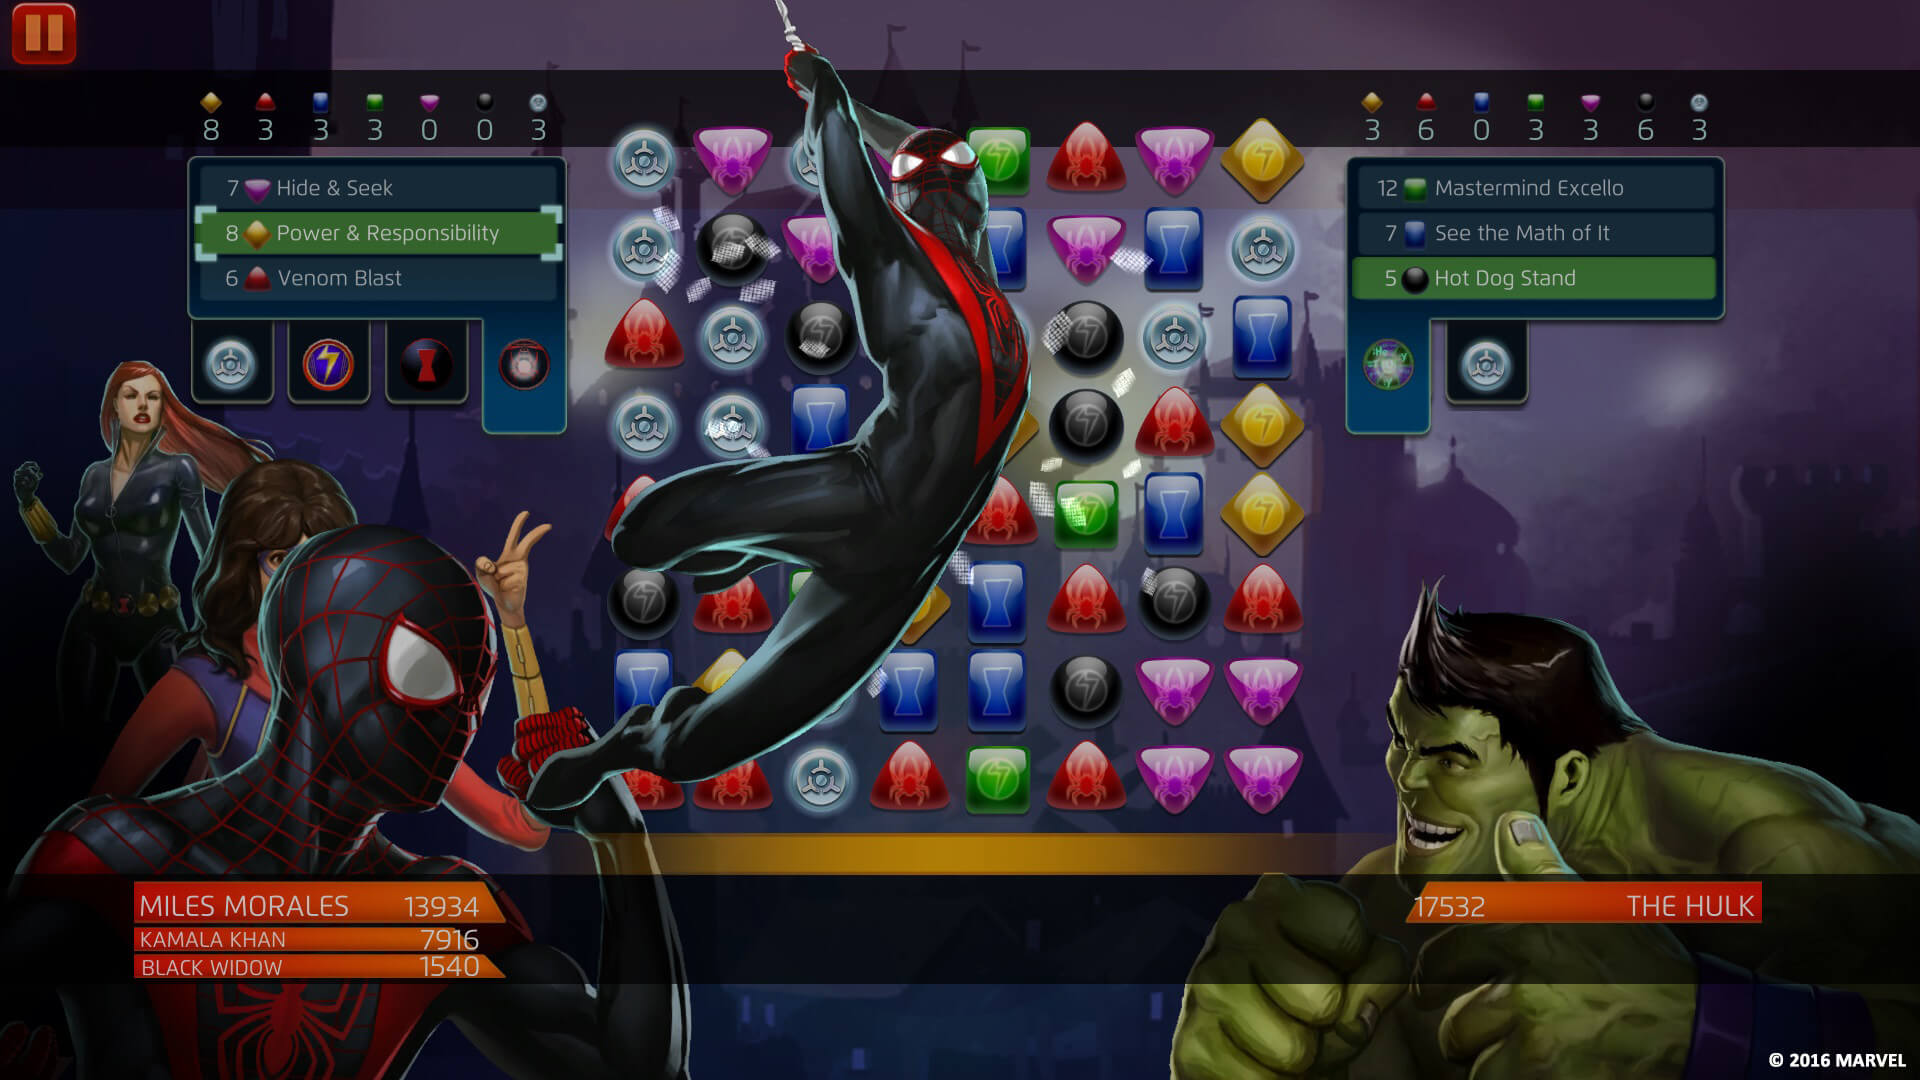 Miles Morales facing off against The Hulk in Marvel Puzzle Quest